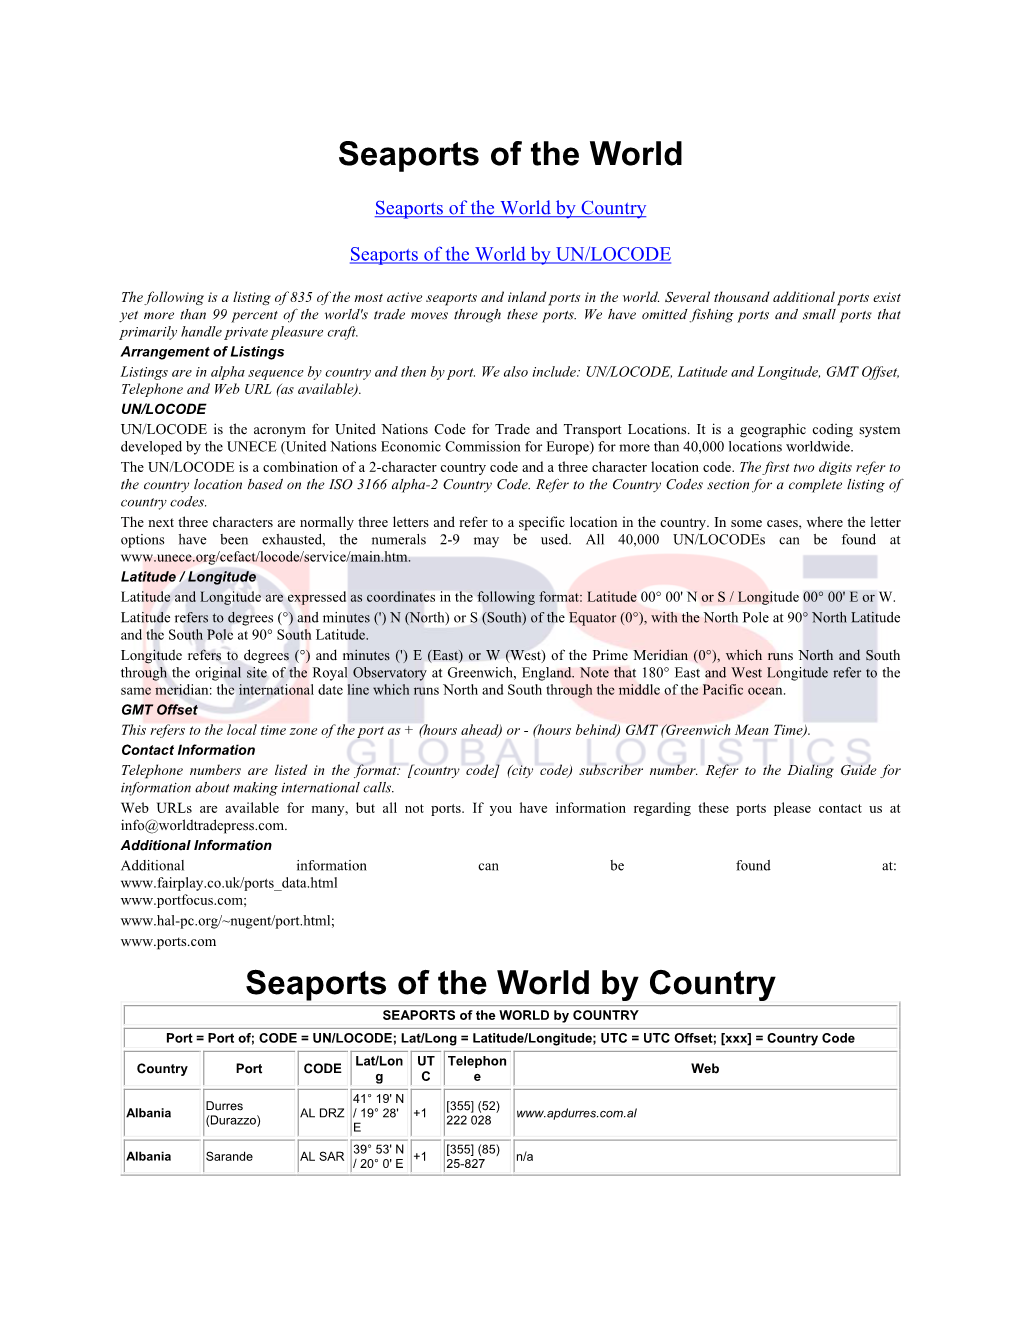 Seaports of the World by UN/LOCODE